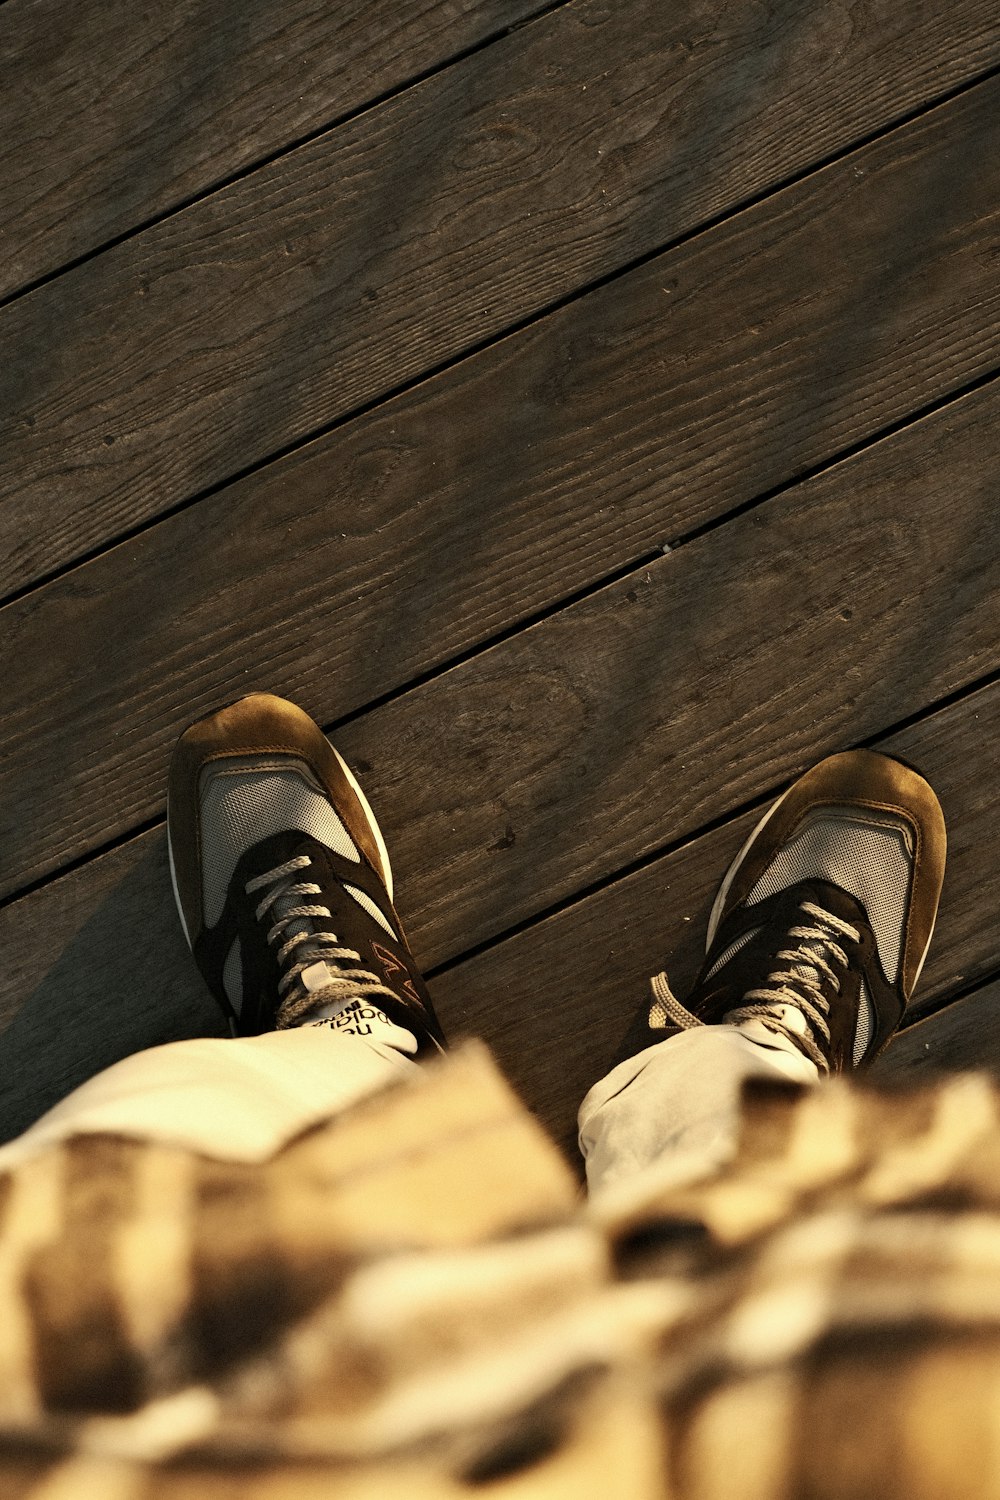 a pair of shoes sitting on top of a wooden floor